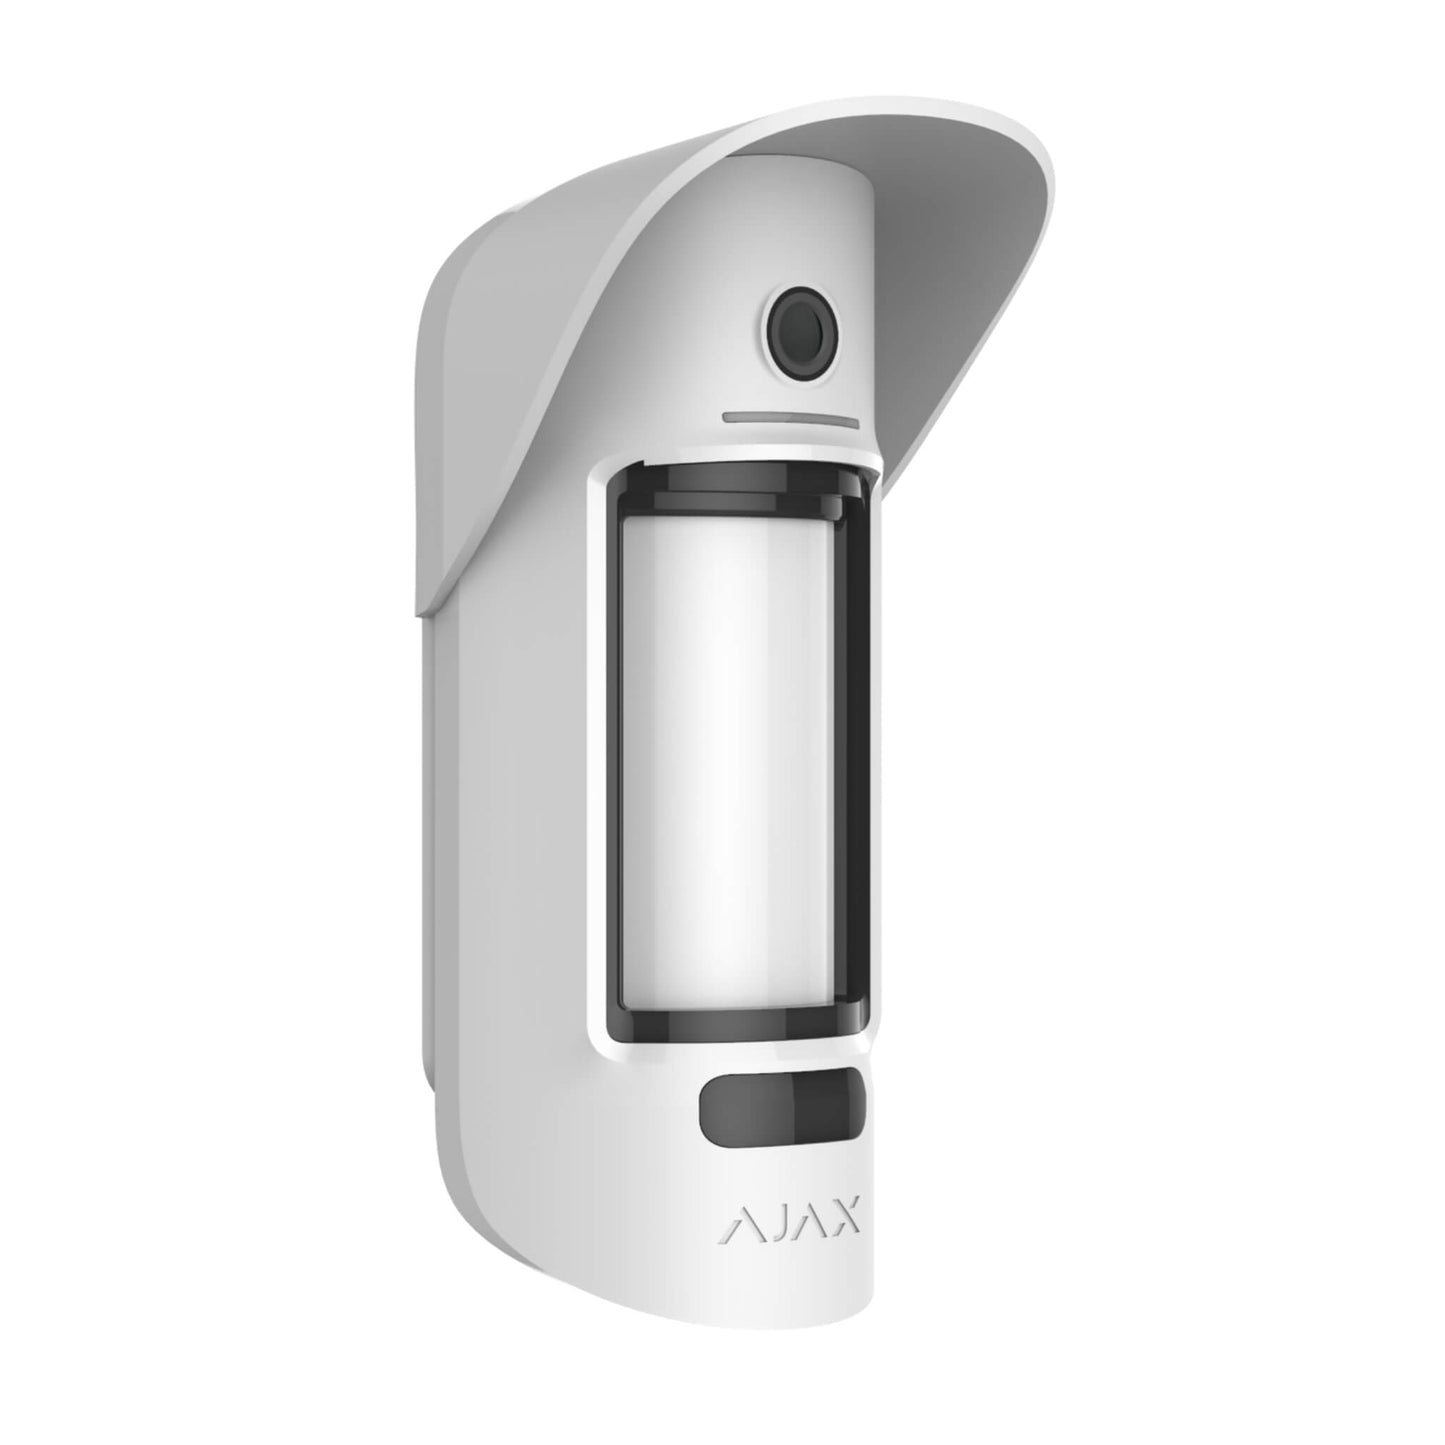 White Ajax MotionCam (PhoD) Outdoor - a wireless motion detector with camera for photo real verification of alarms , for home and business security. the device ships in a size of 206 × 108 × 93 mm. and weighs 470 grams. Device is rated IP65 and is for outdoor use only, Turned left view of device is displayed 